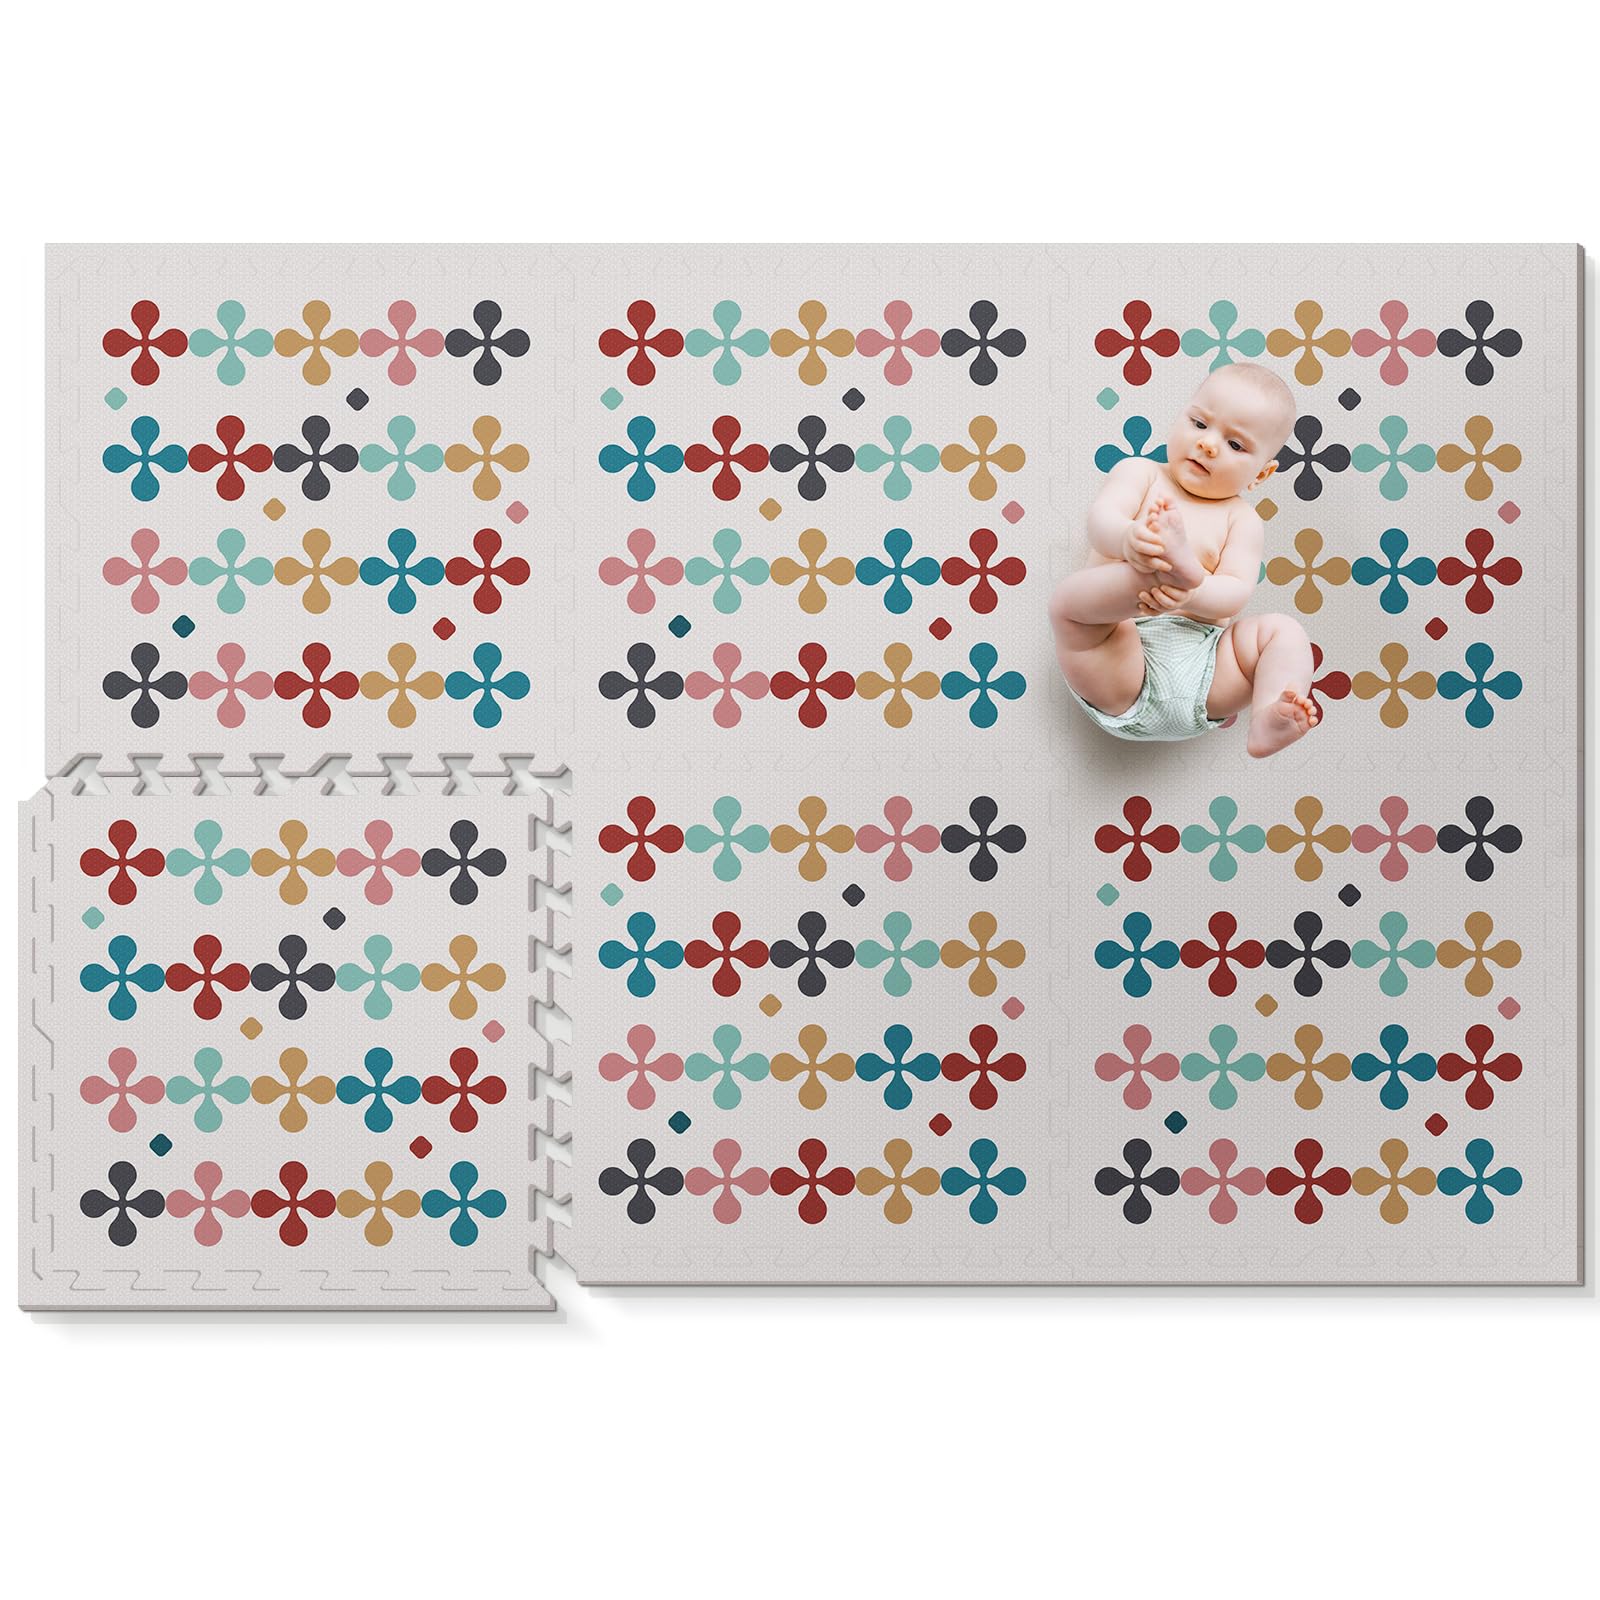 PIGLOG Baby Play Mat - Foam Floor Tiles Interlocking Foam Play Mat 72x48 Inches Soft Non Toxic Puzzle Mat for Infants and Toddlers Tummy Time Mat Crawling Mat (Blossom)